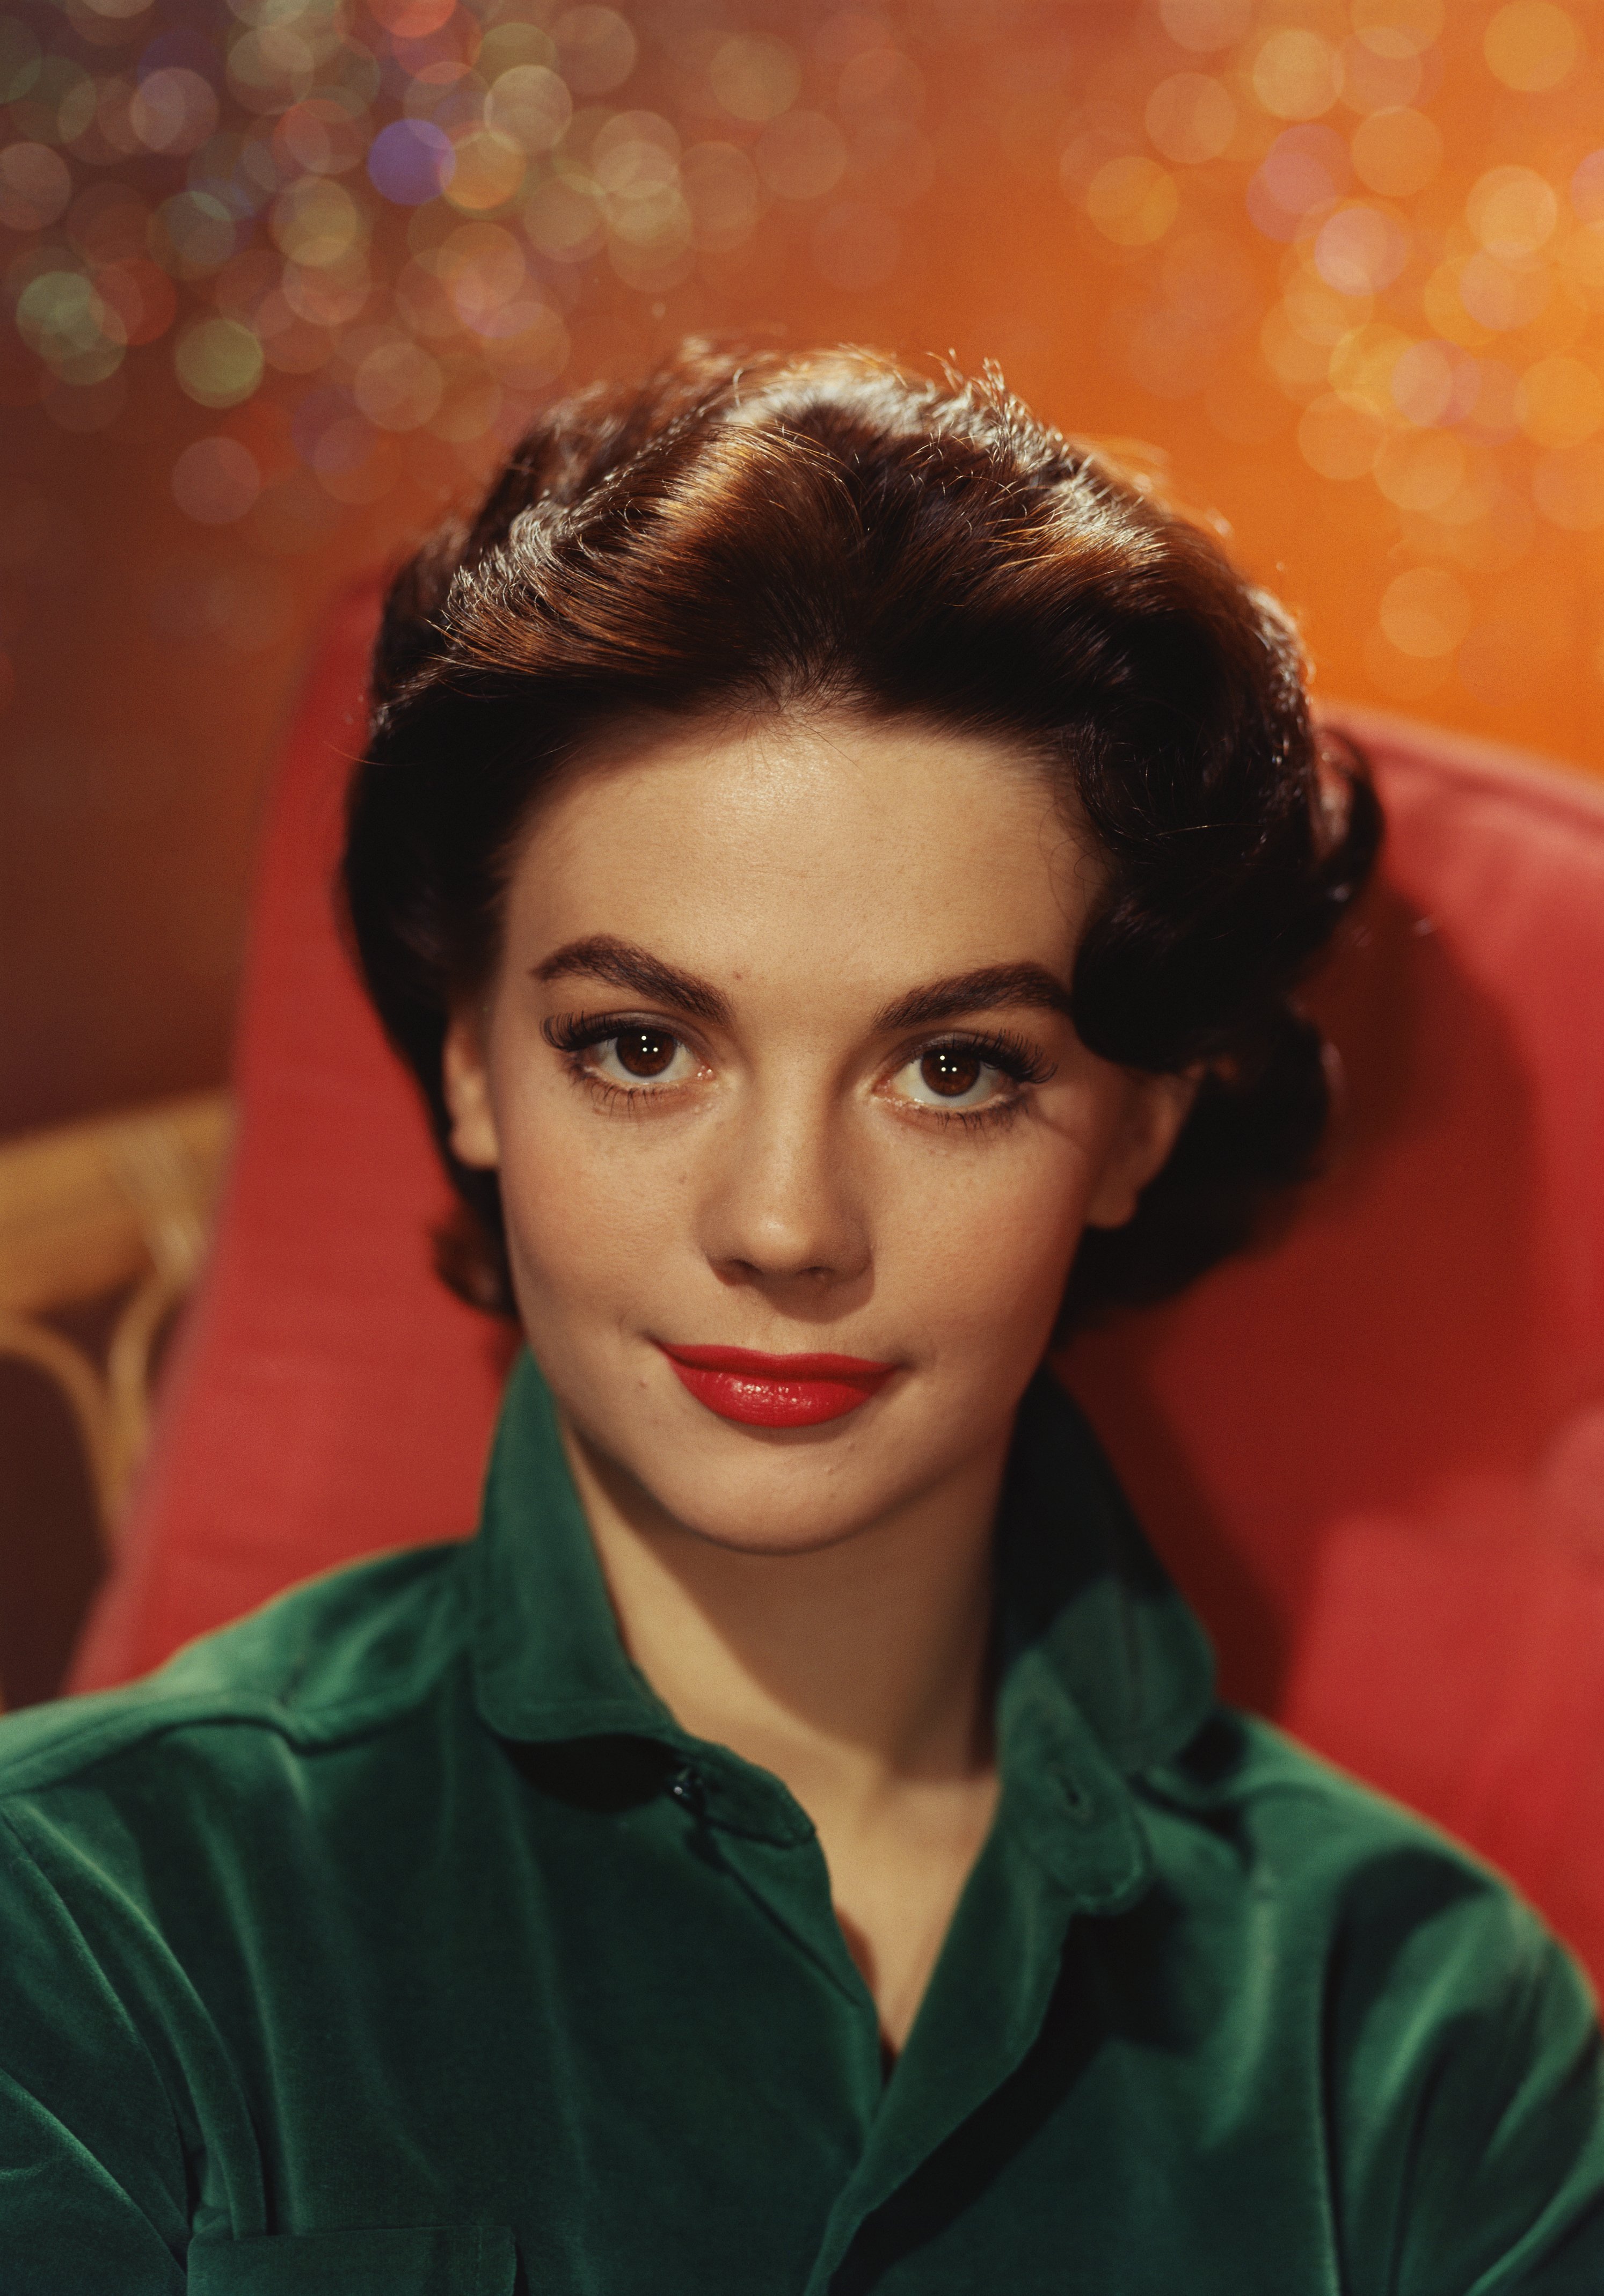 Portrait of American actress Natalie Wood. | Source: Getty Images